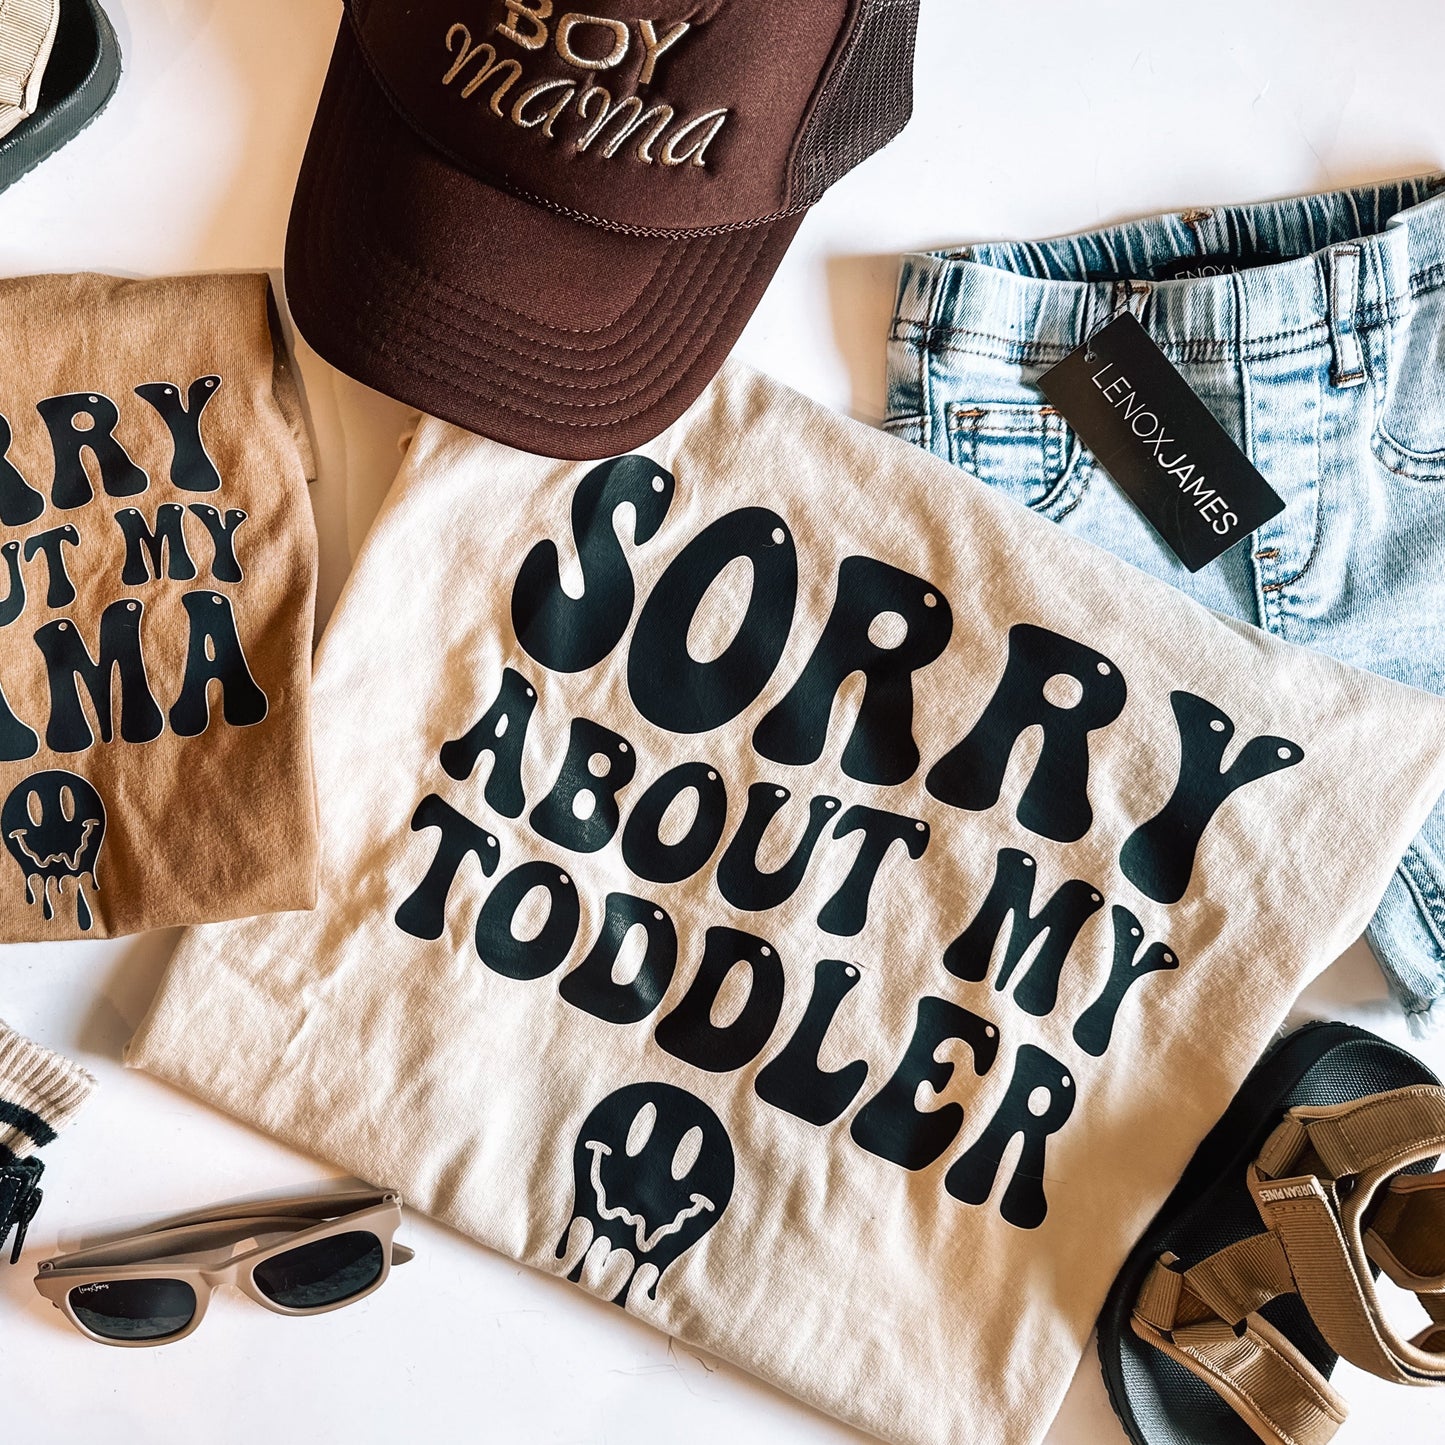 Sorry About My Toddler | Comfort Color Tee- Ivory